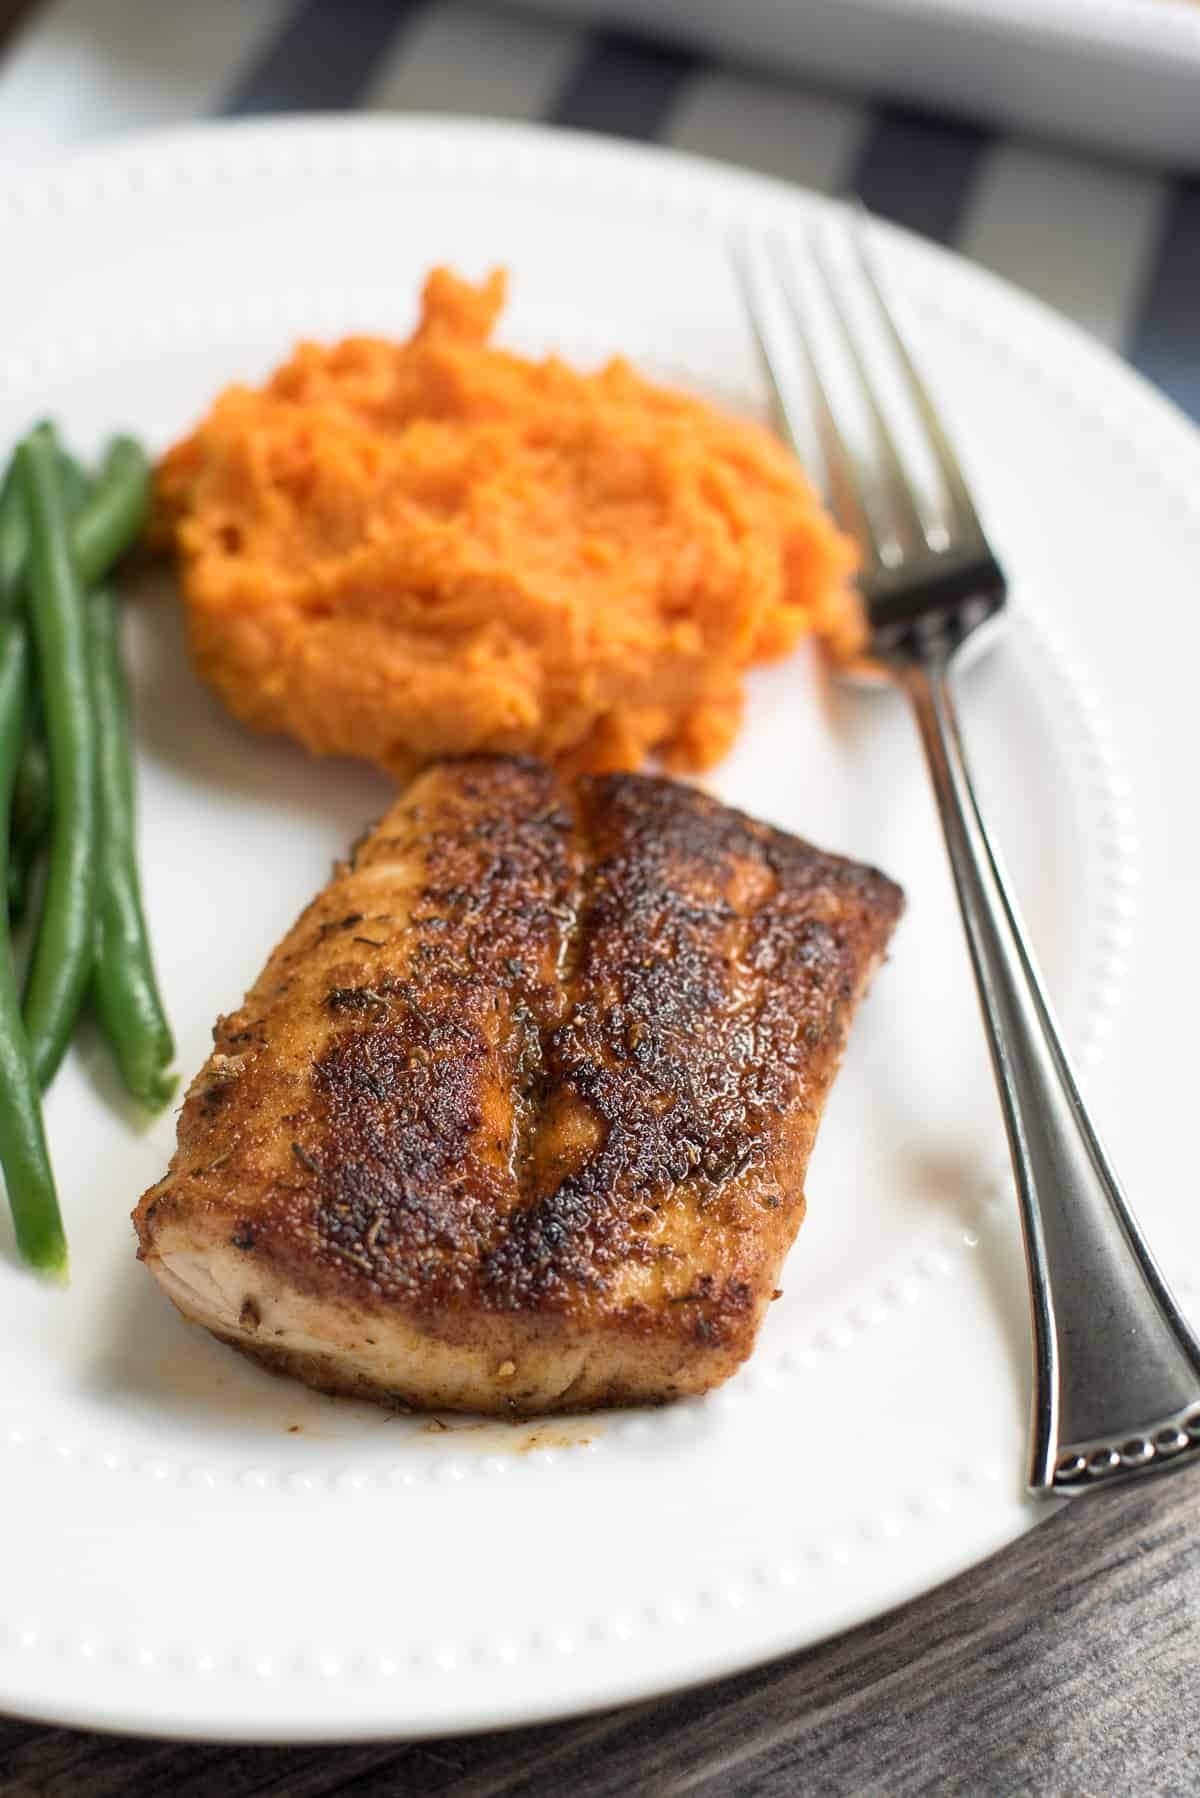 Grilled Mahi Mahi seasoned with Cajun mix  with green beans and sweet potato served on a plate with fork